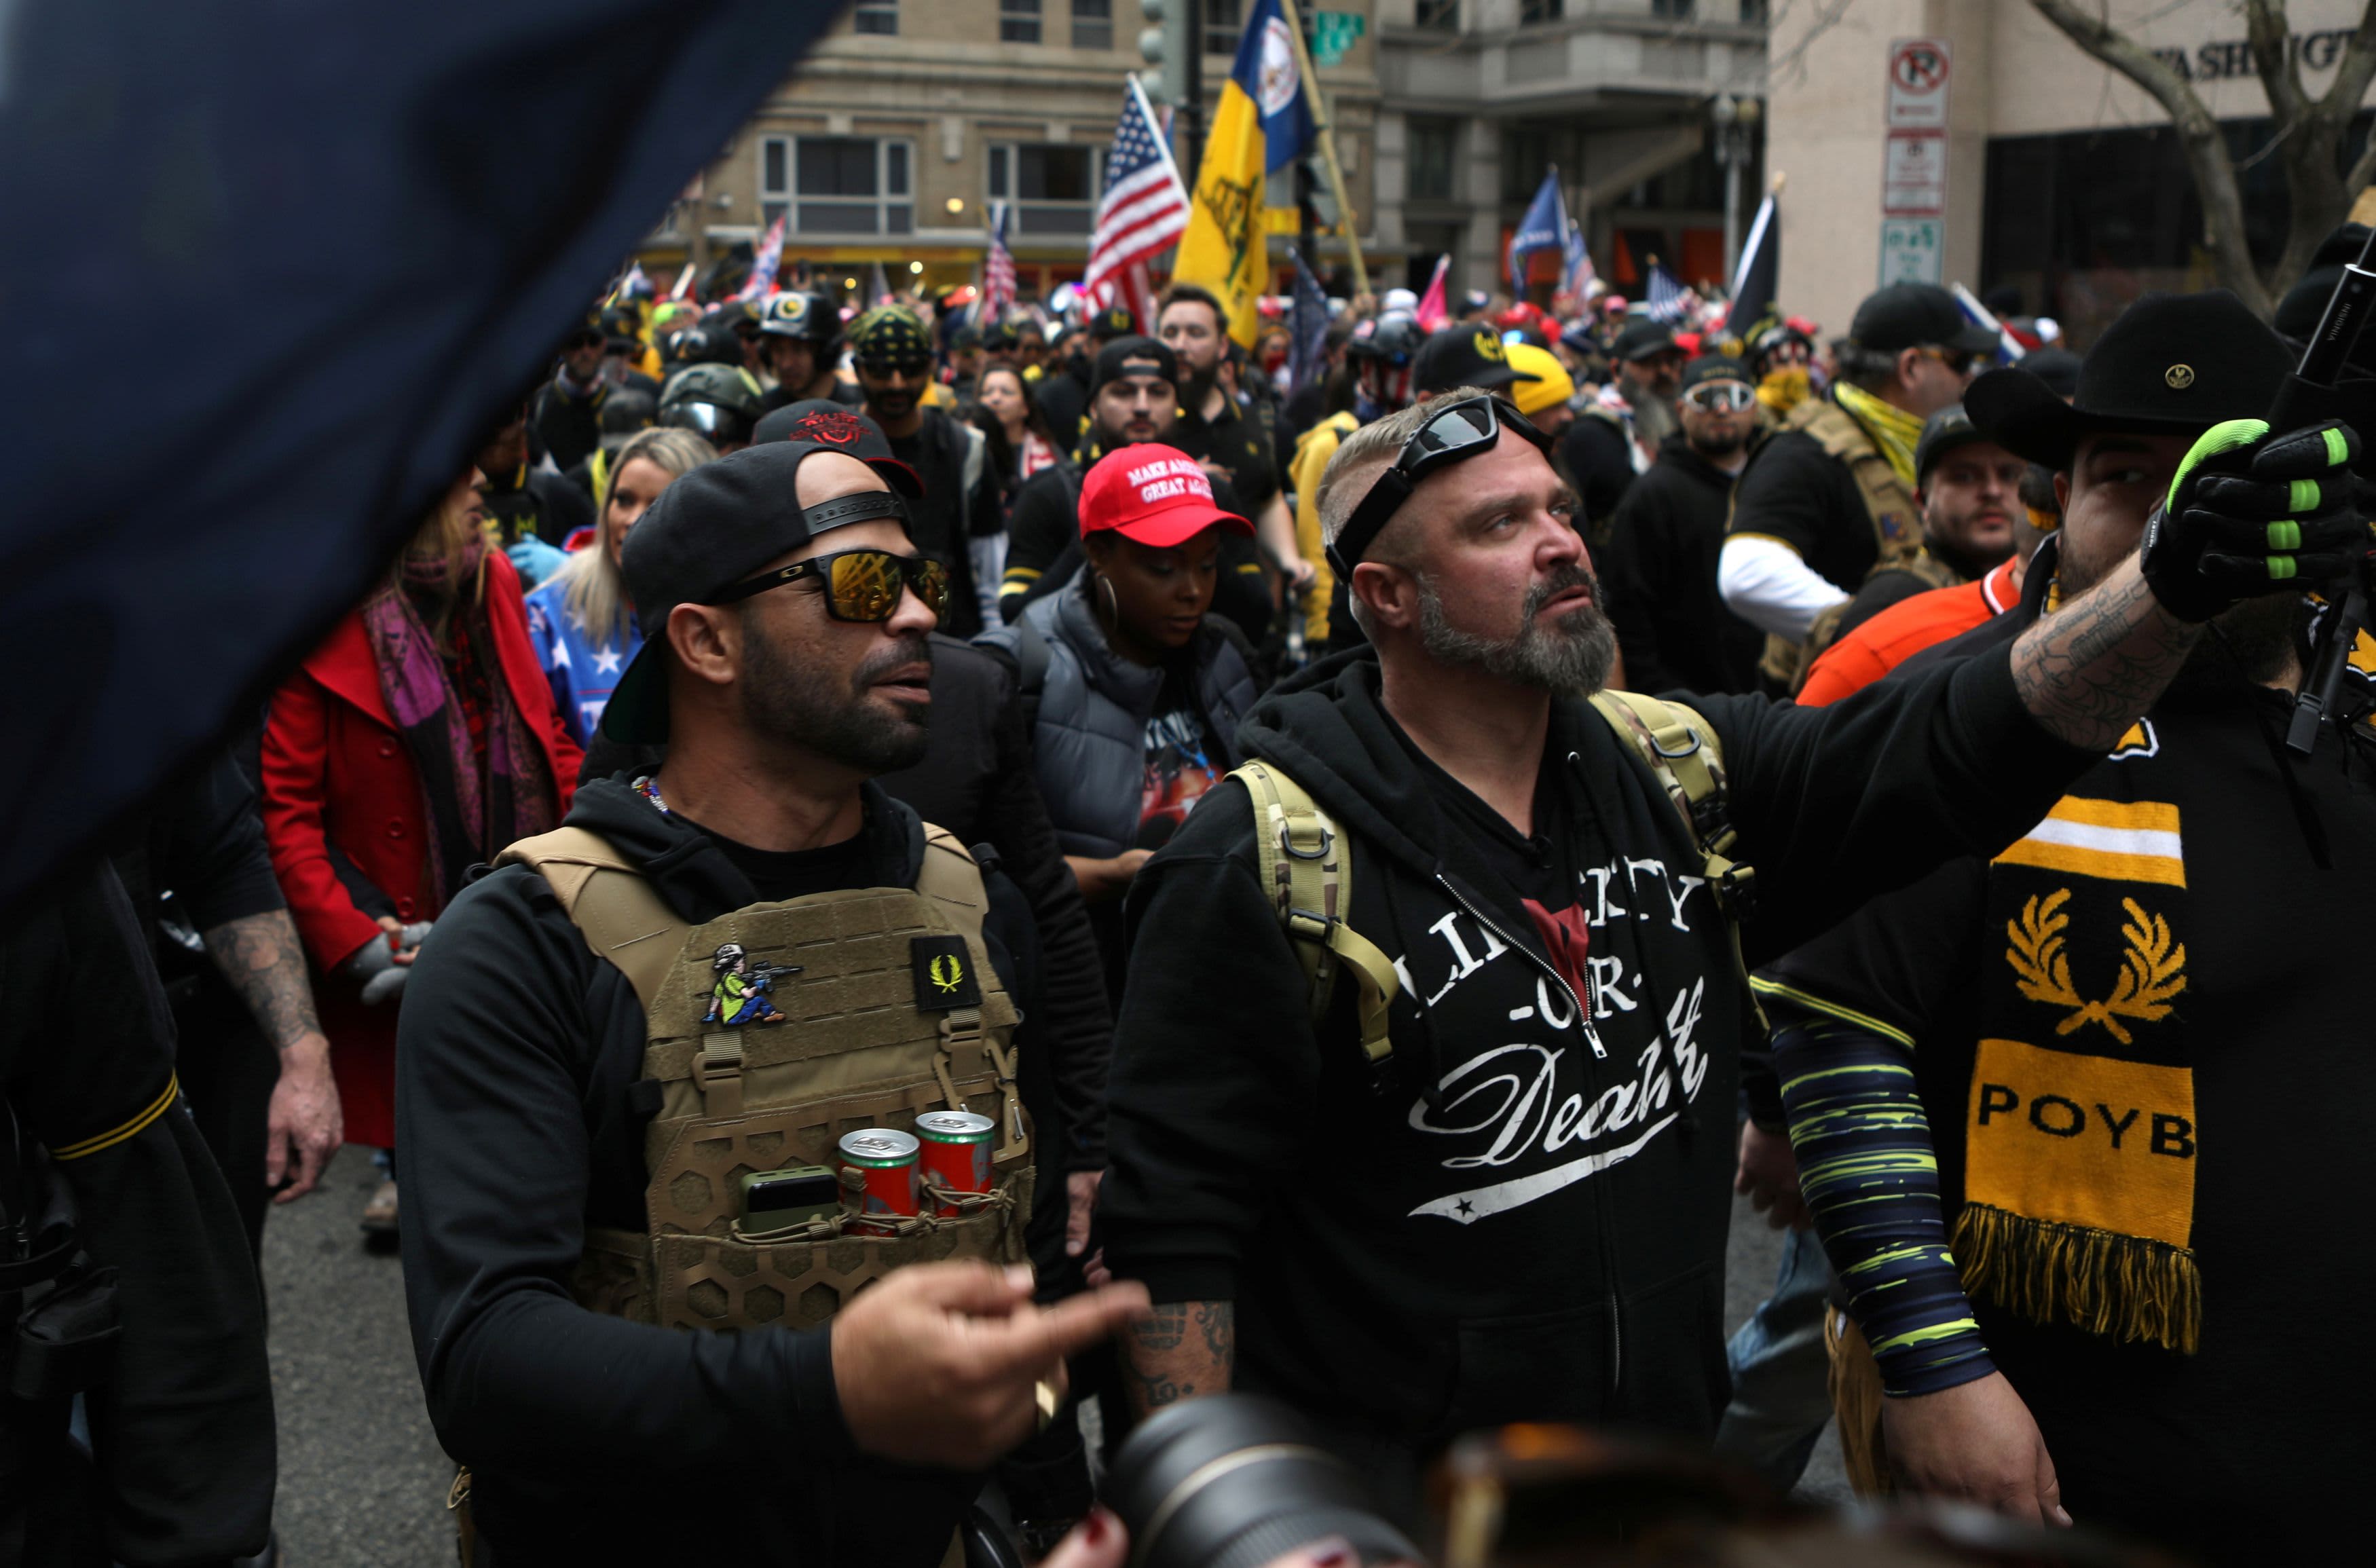 Leaders of pro-Trump groups Oath Keepers Proud Boys subpoenaed in Jan. 6 Capitol riot probe – CNBC